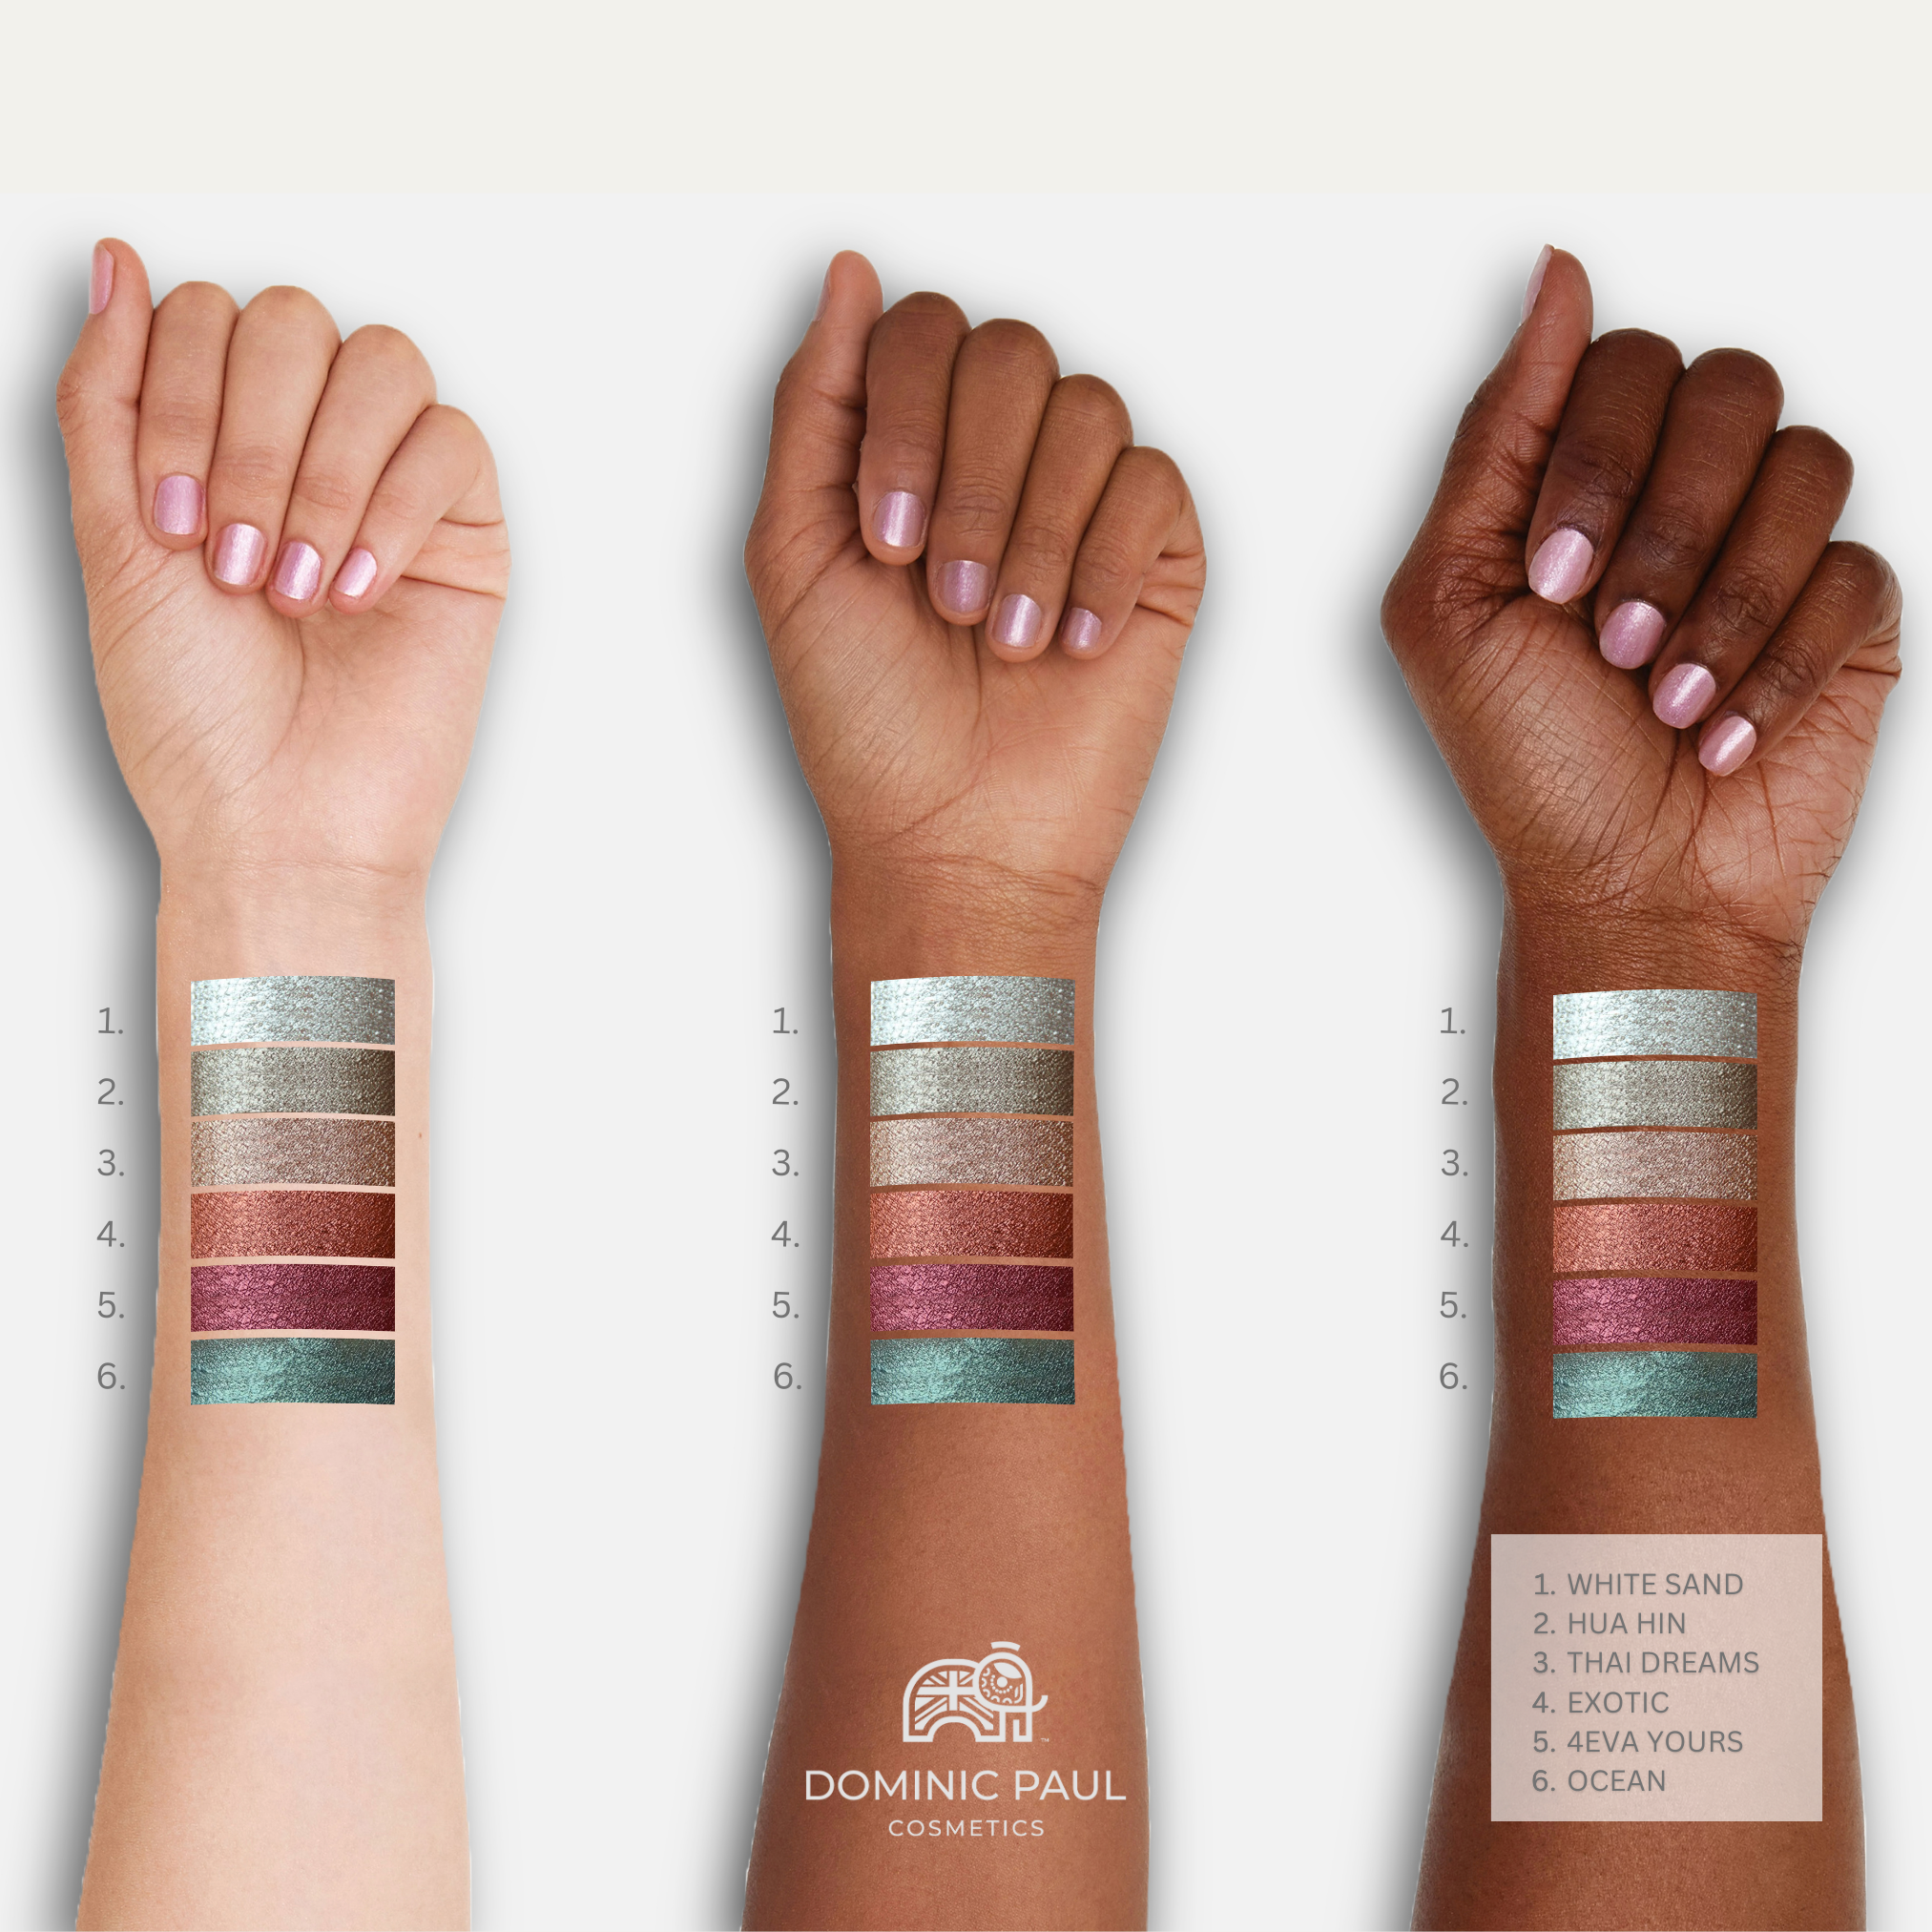 Dominic Paul Eyeshadow Paint, swatches on 3 different model's arms with different skin tones